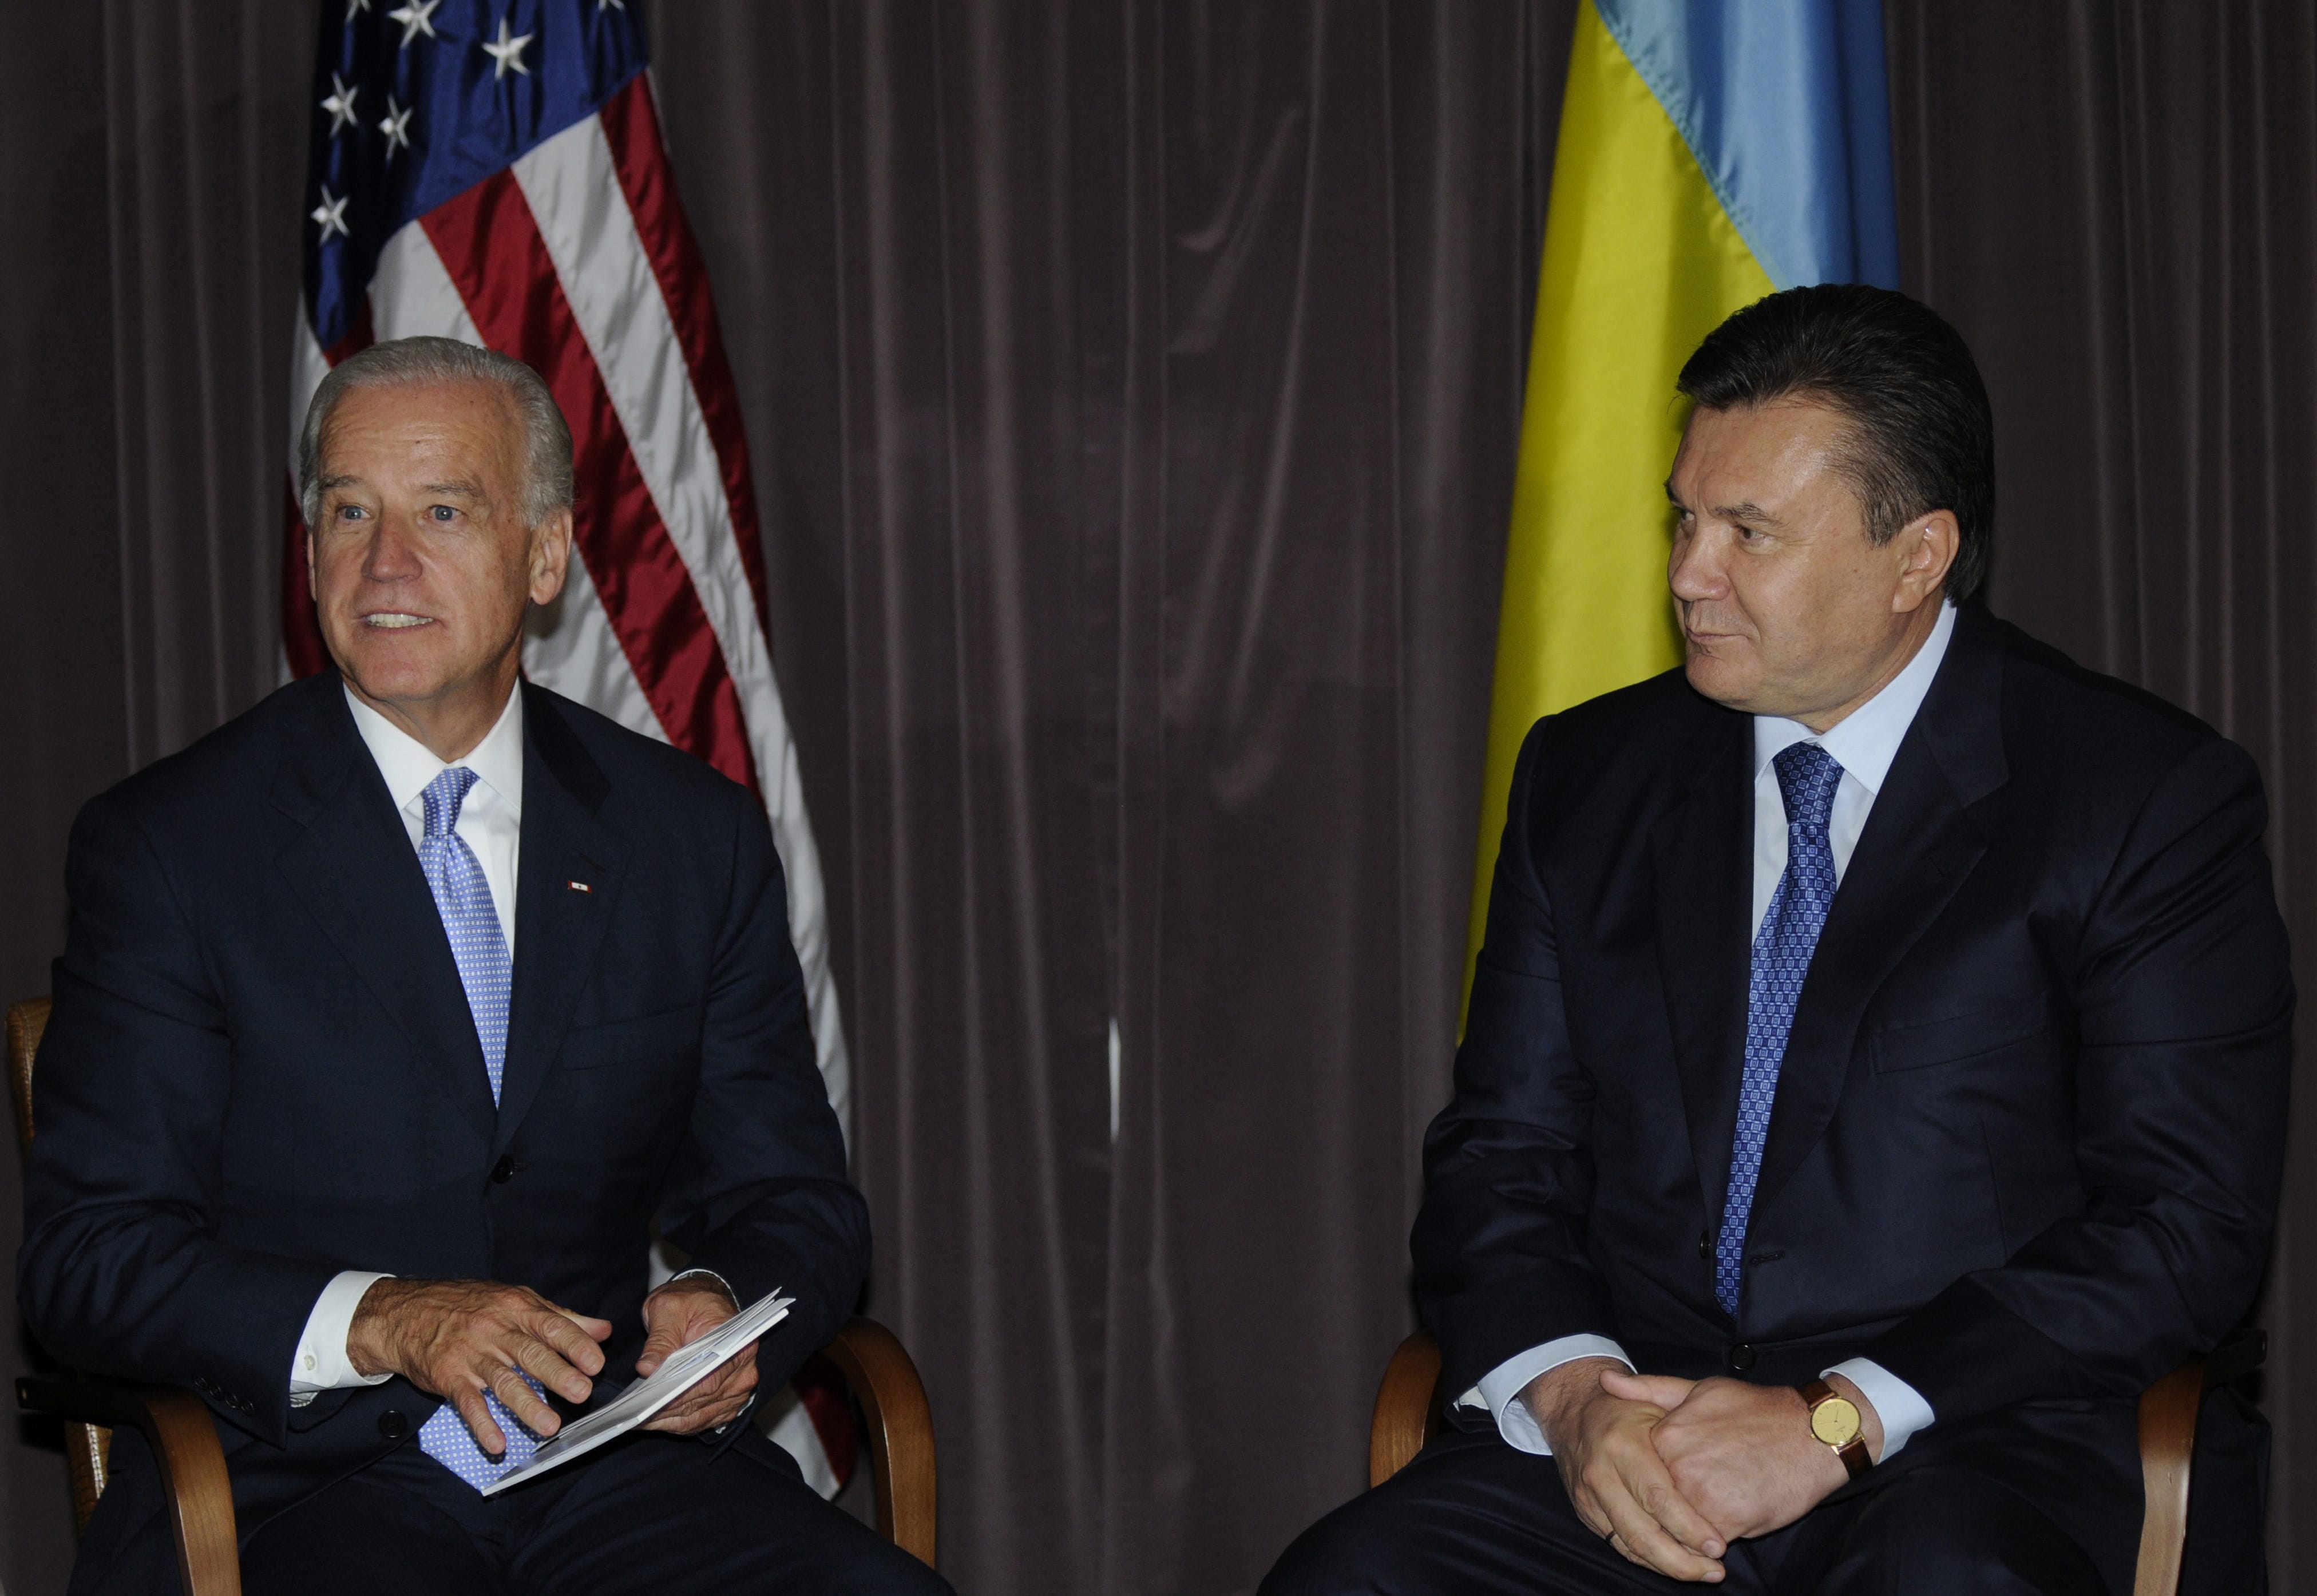 Vice President Joe Biden meets with Viktor Yanukovych, the then-Moscow-backed presidential candidate in Kiev, Ukraine, in 2009.